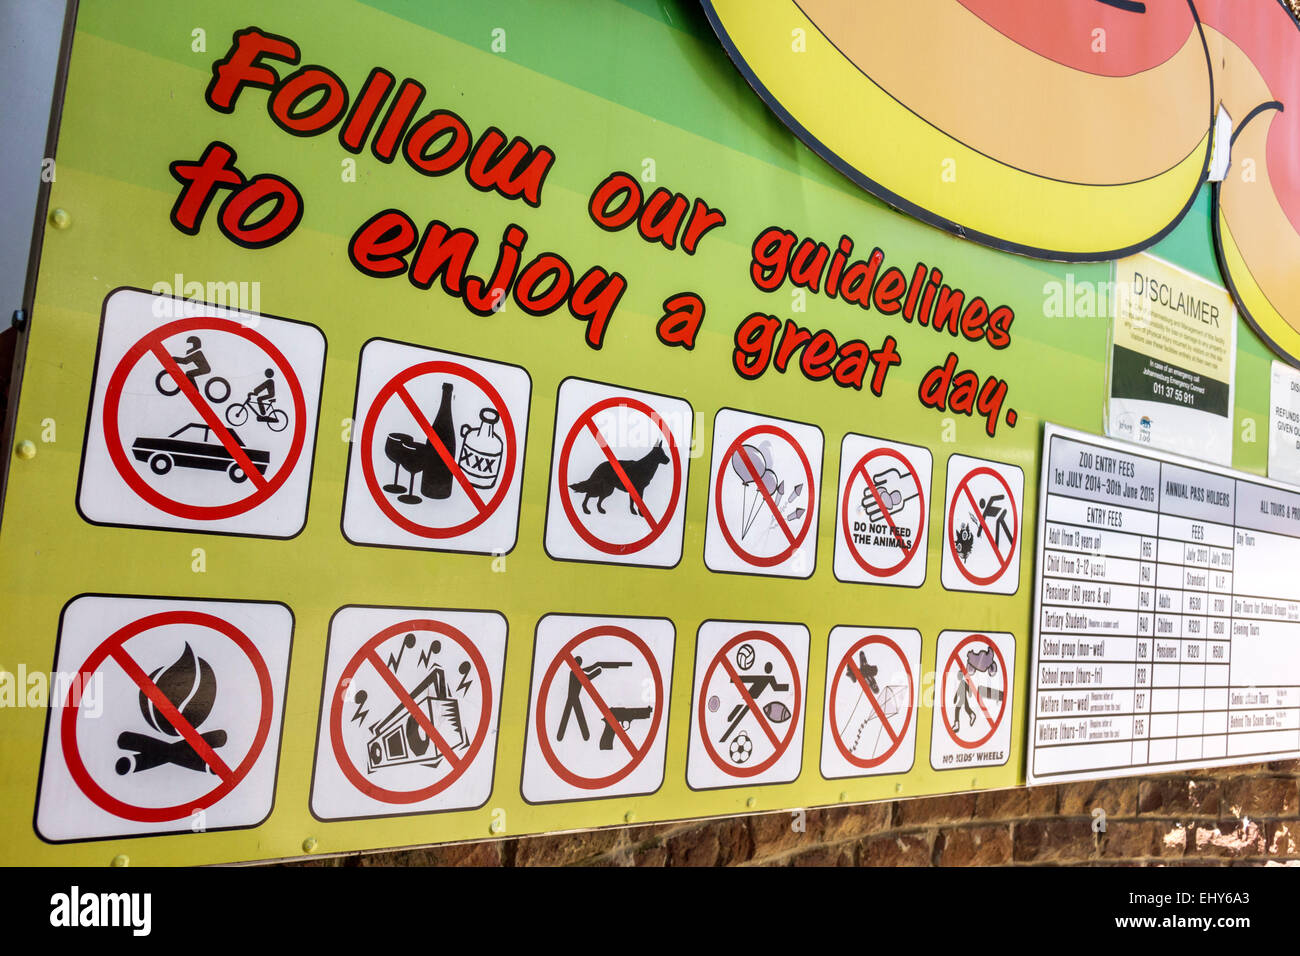 Johannesburg South Africa,Zoo,entrance,sign,not allowed,rules,SAfri150304030 Stock Photo